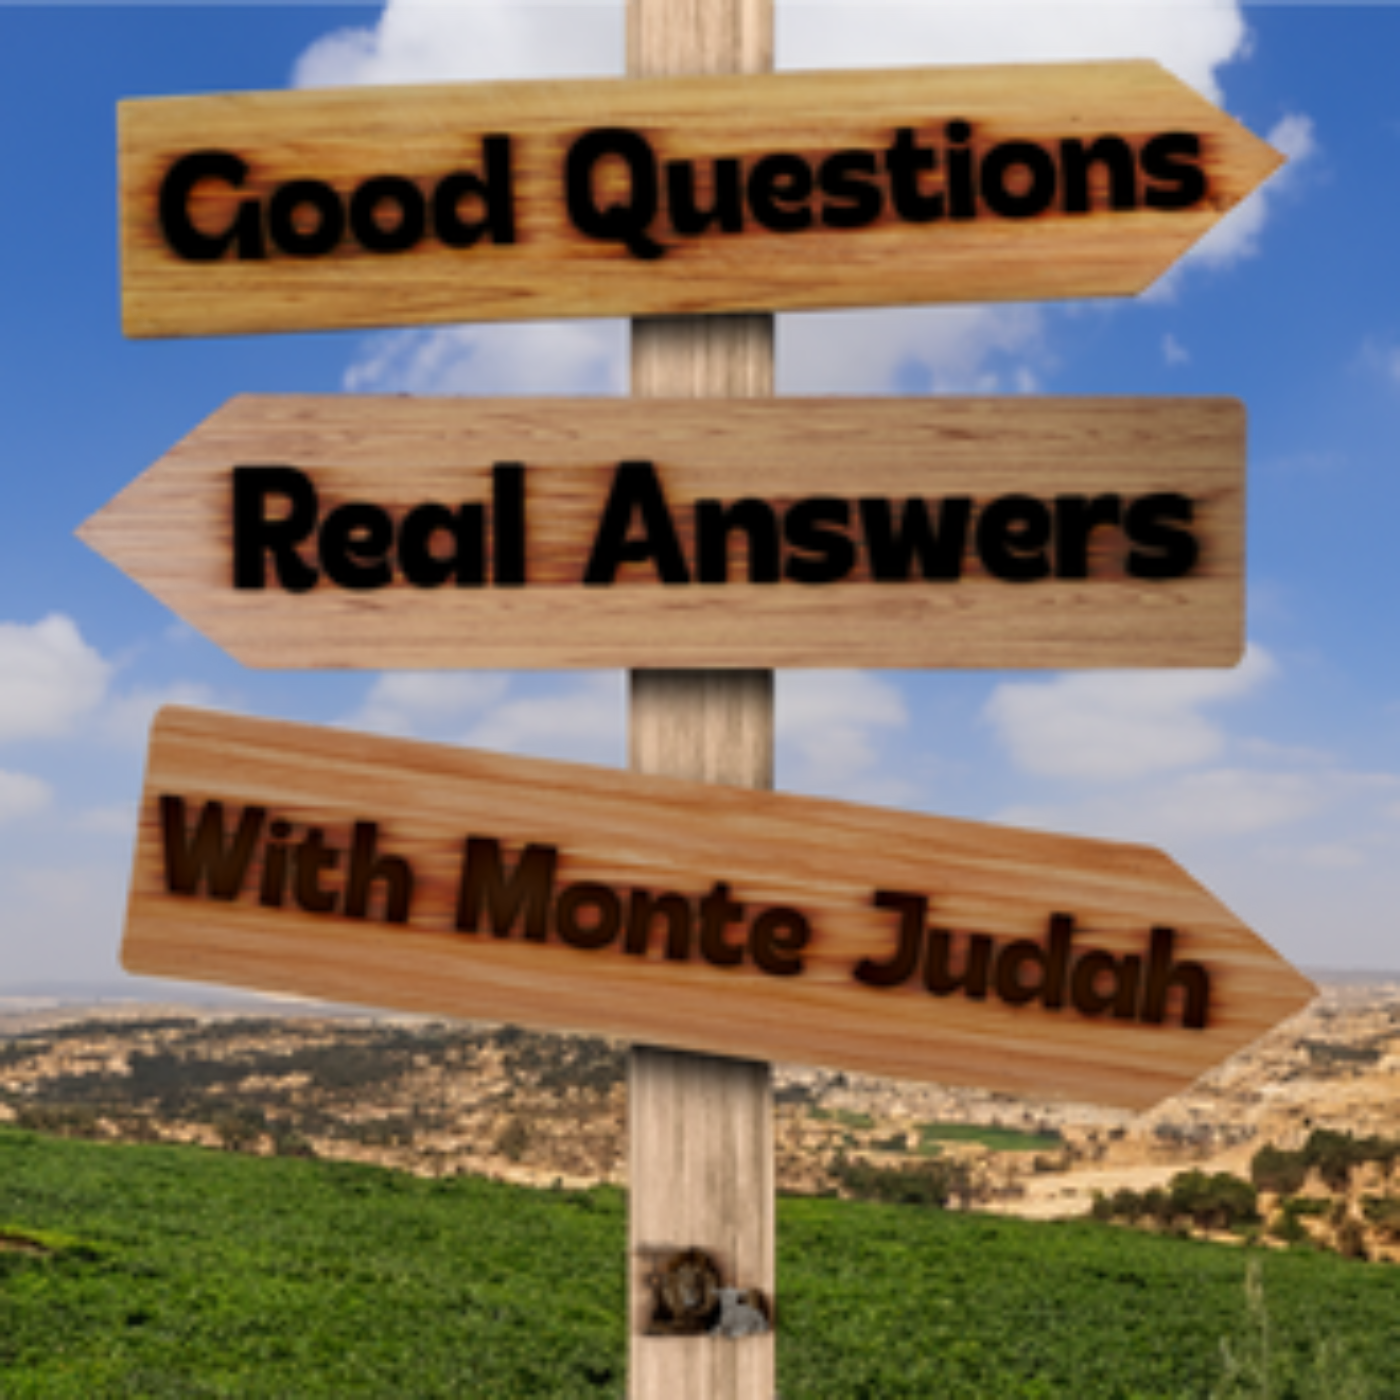 Good Questions, Real Answers | Episode 22 | Lion and Lamb Ministries